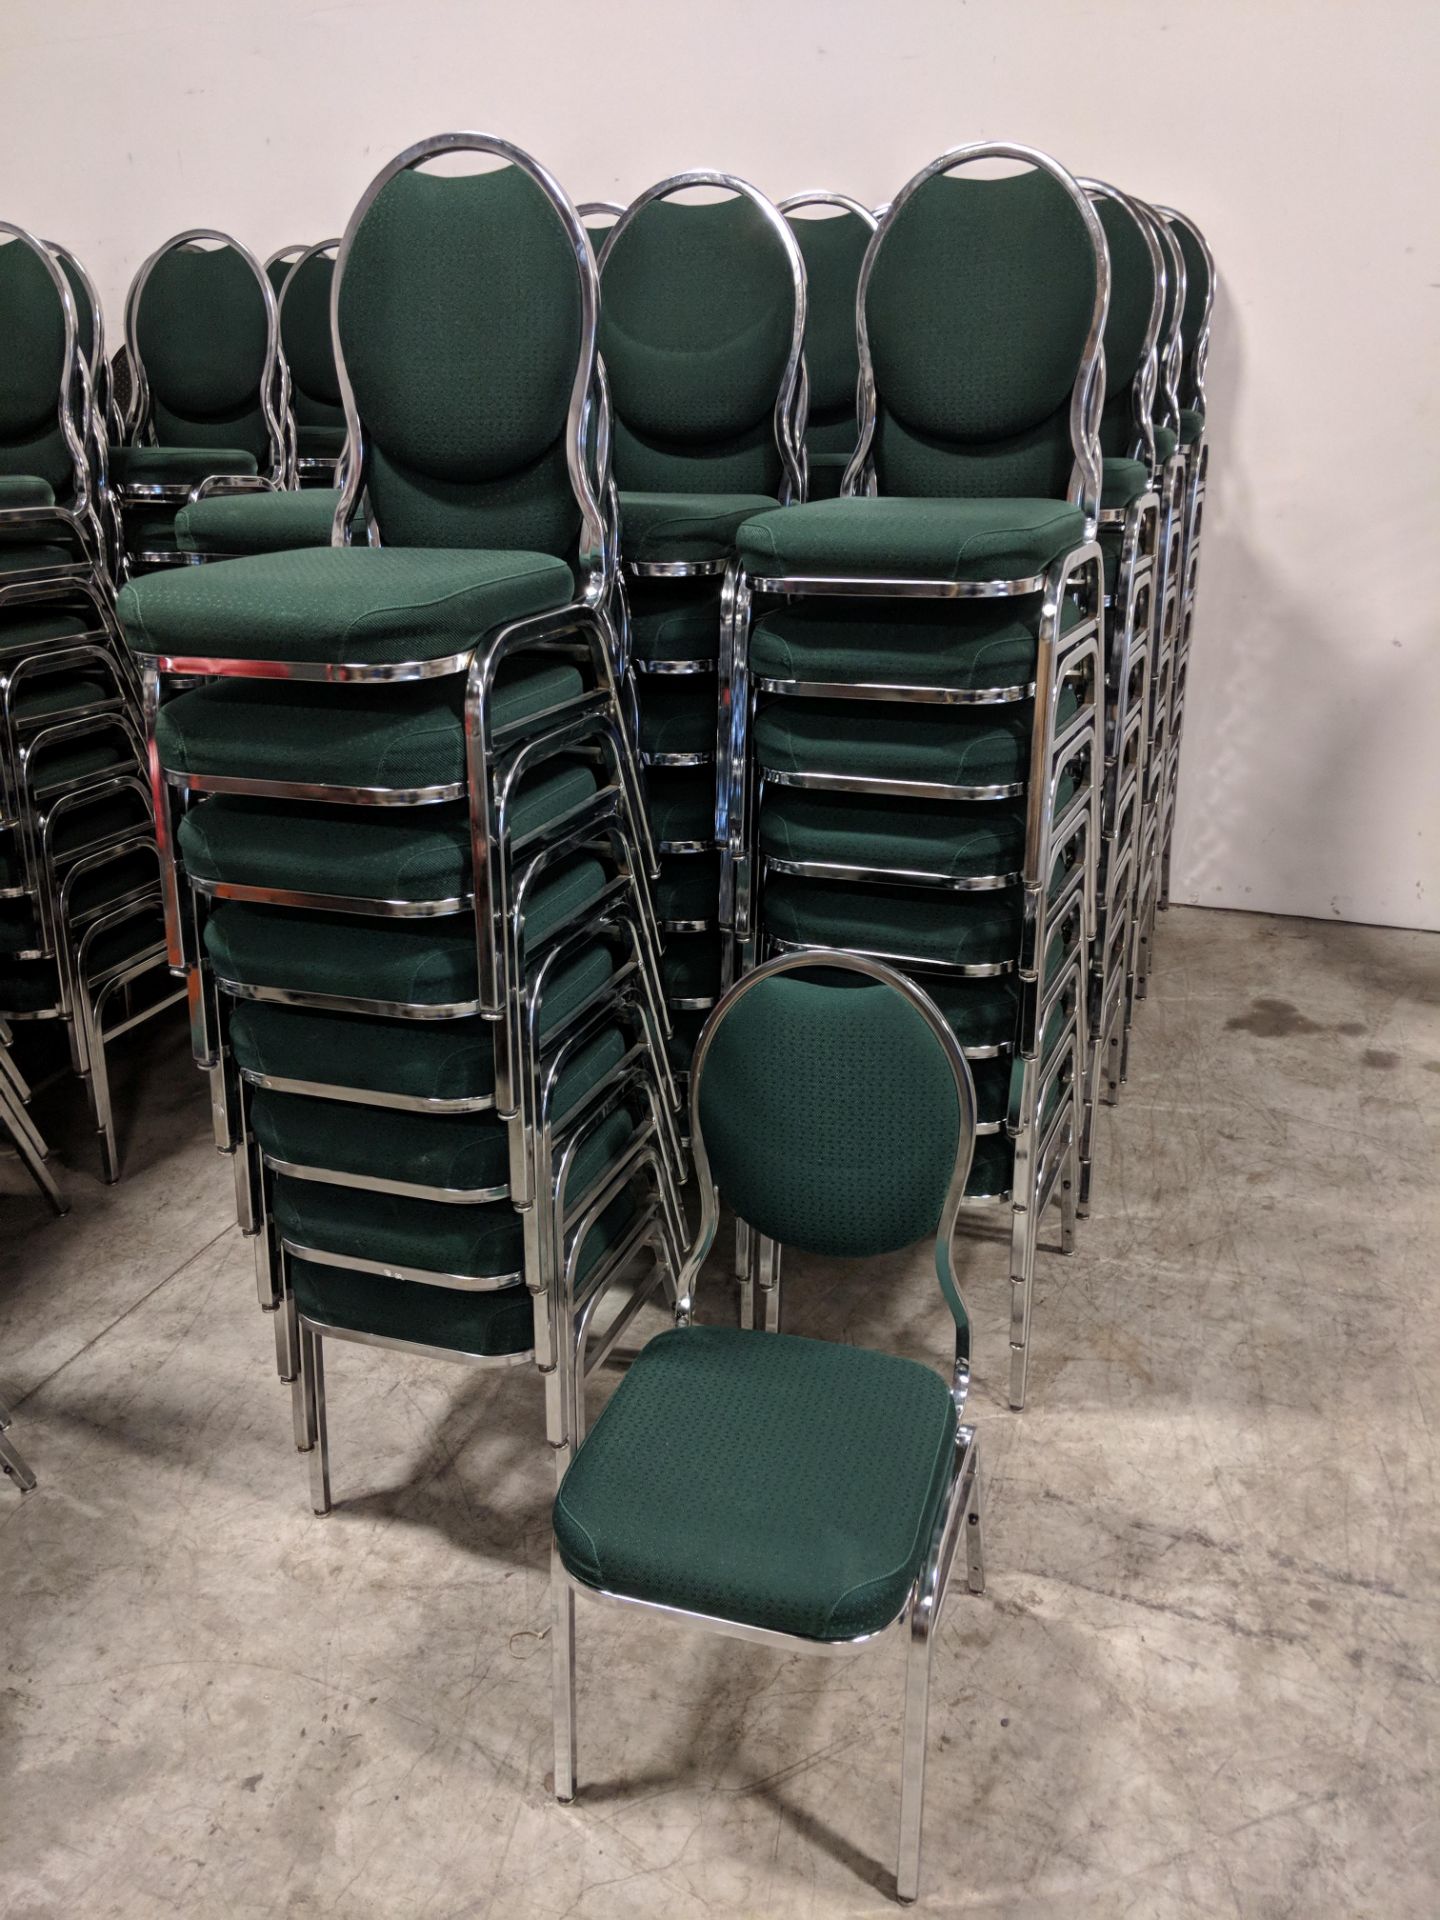 Green Stacking Chairs - Lot of 105